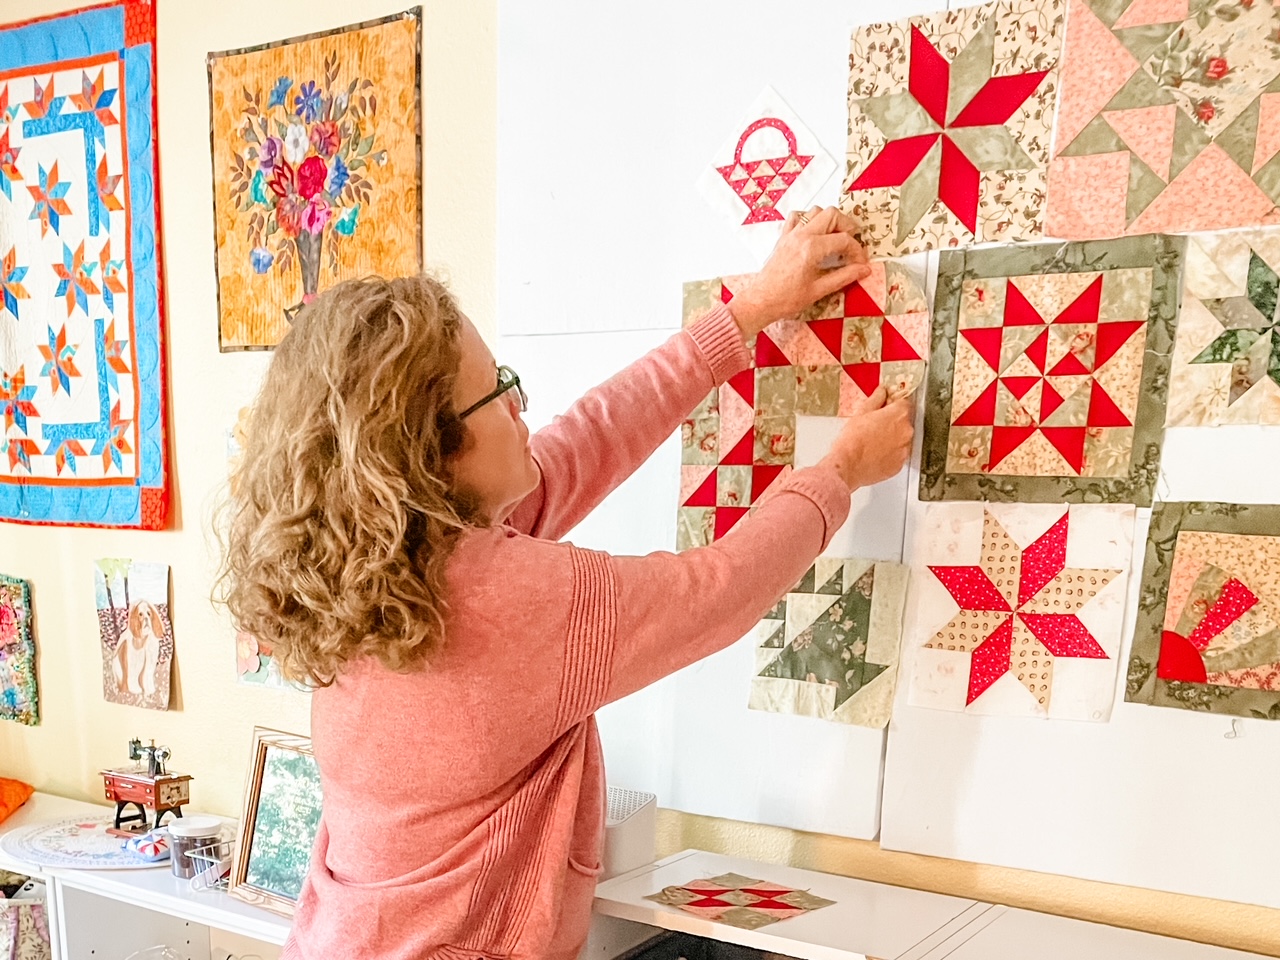 How to Build a Quilt Design Wall, quilting